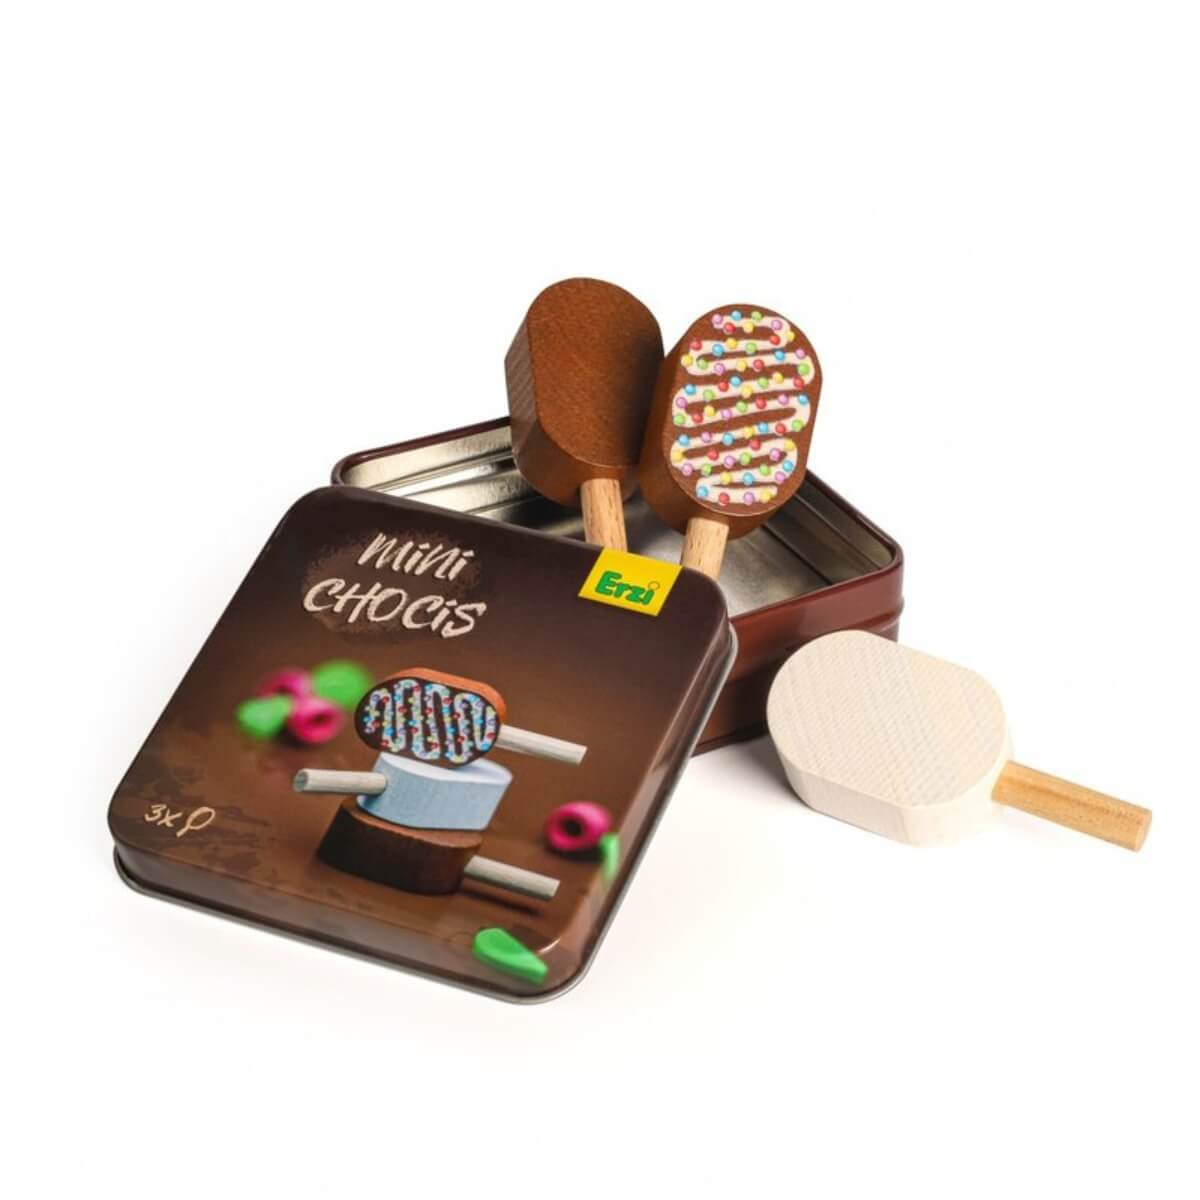 Only 12.72 usd for Erzi Ice Cream Mini Chocis in a Tin Online at the Shop